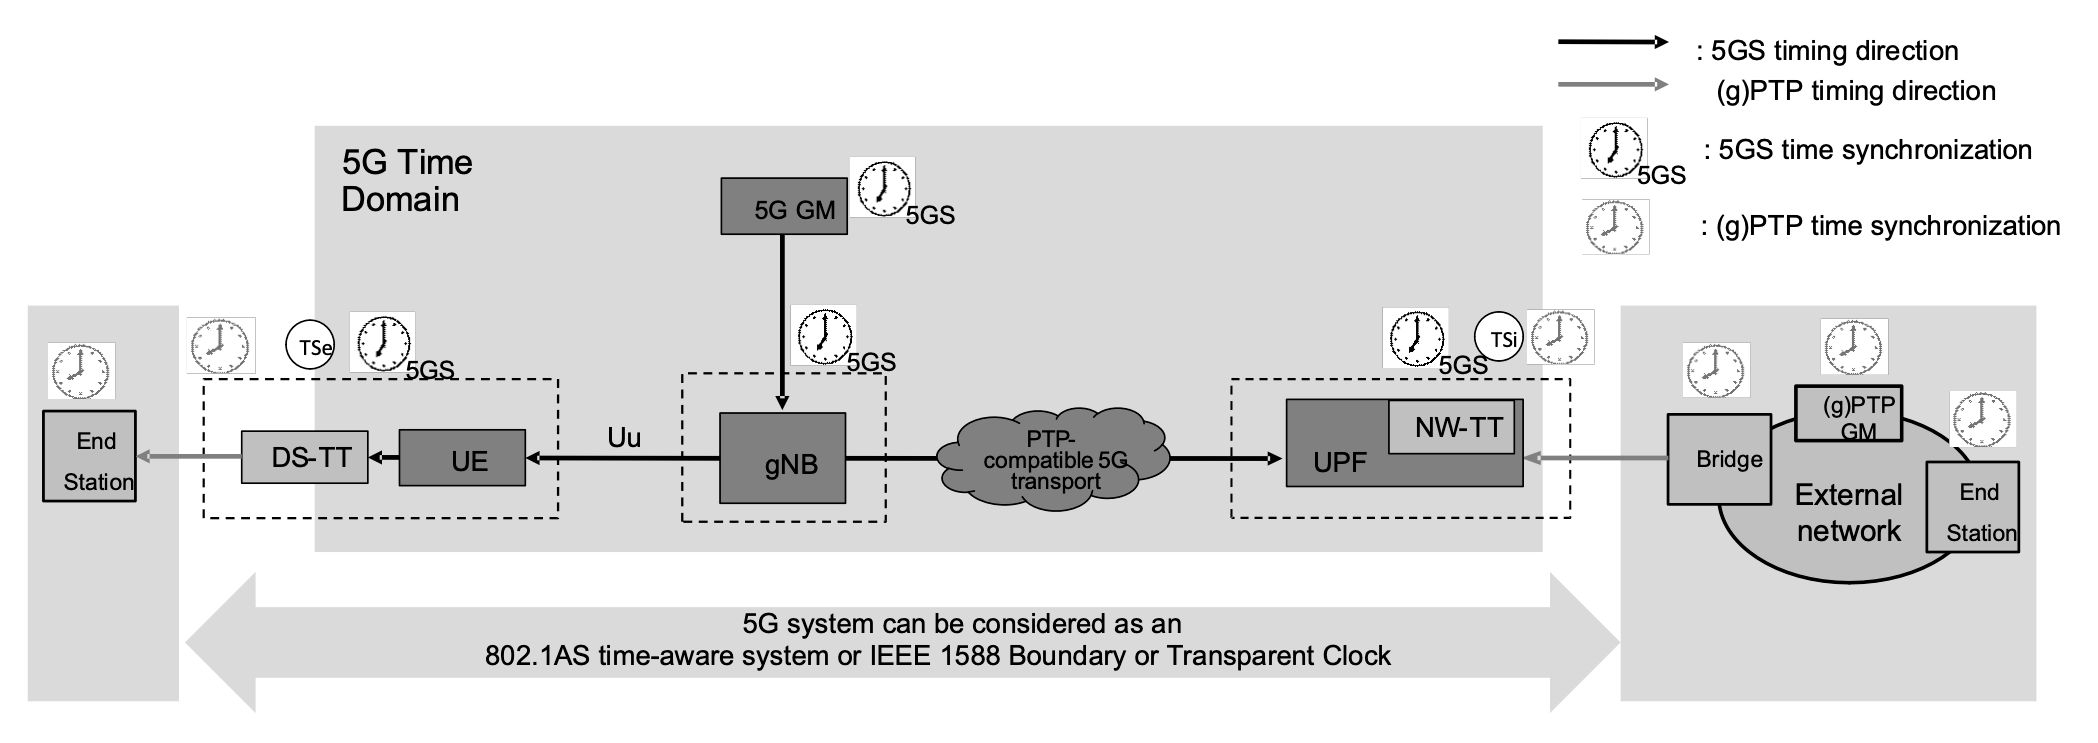 5G Time aware system 802.1AS - IEEE1588